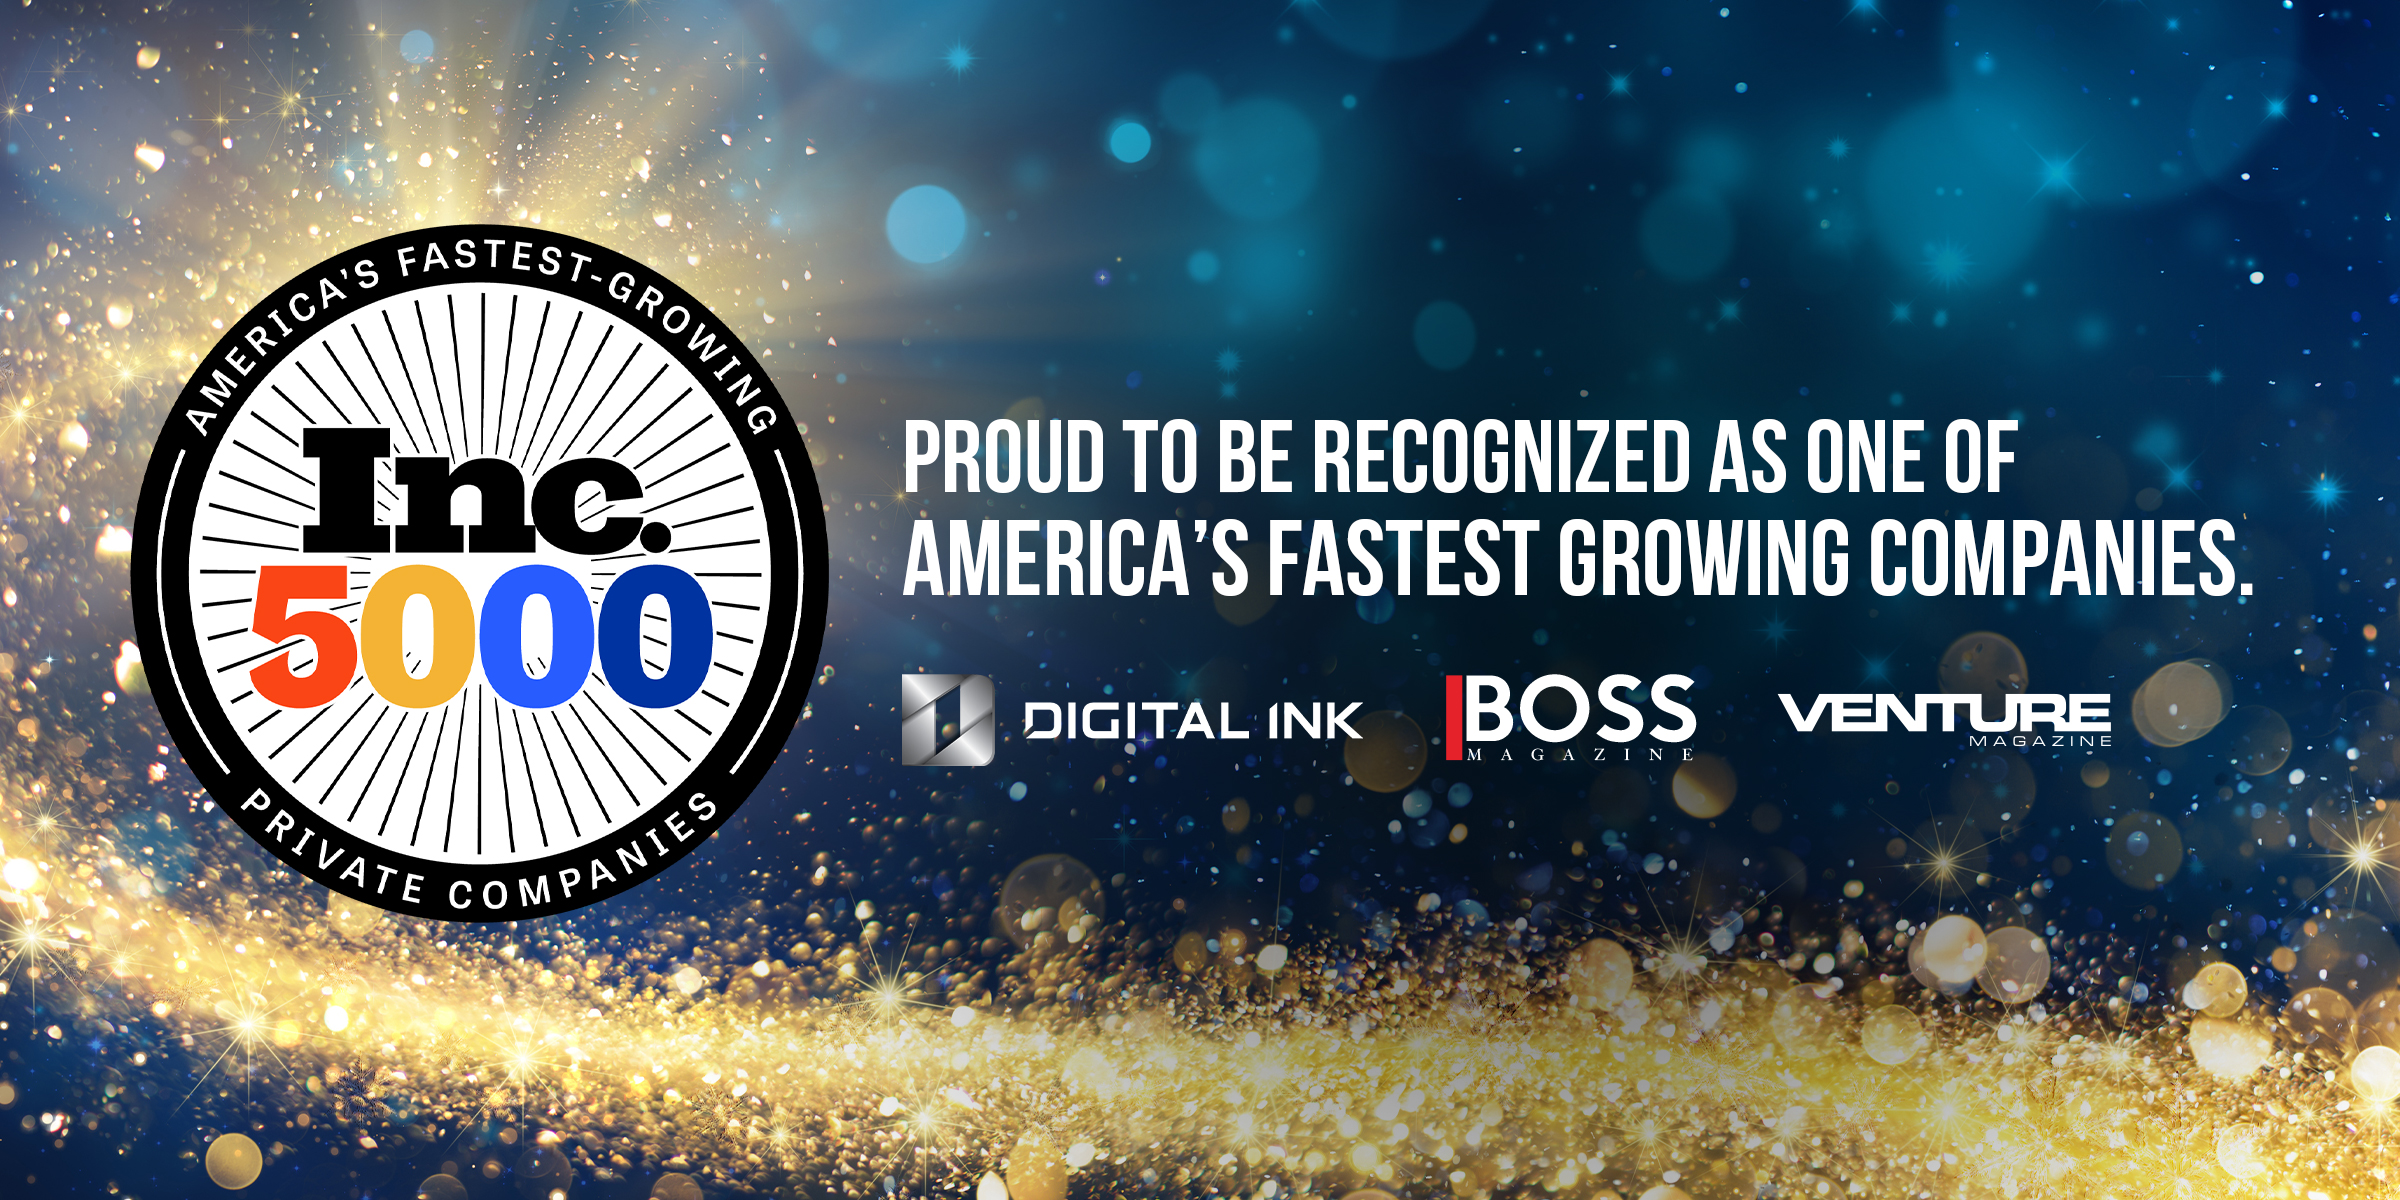 Digital Ink, One Of America's Fastest Growing Media Companies Make The